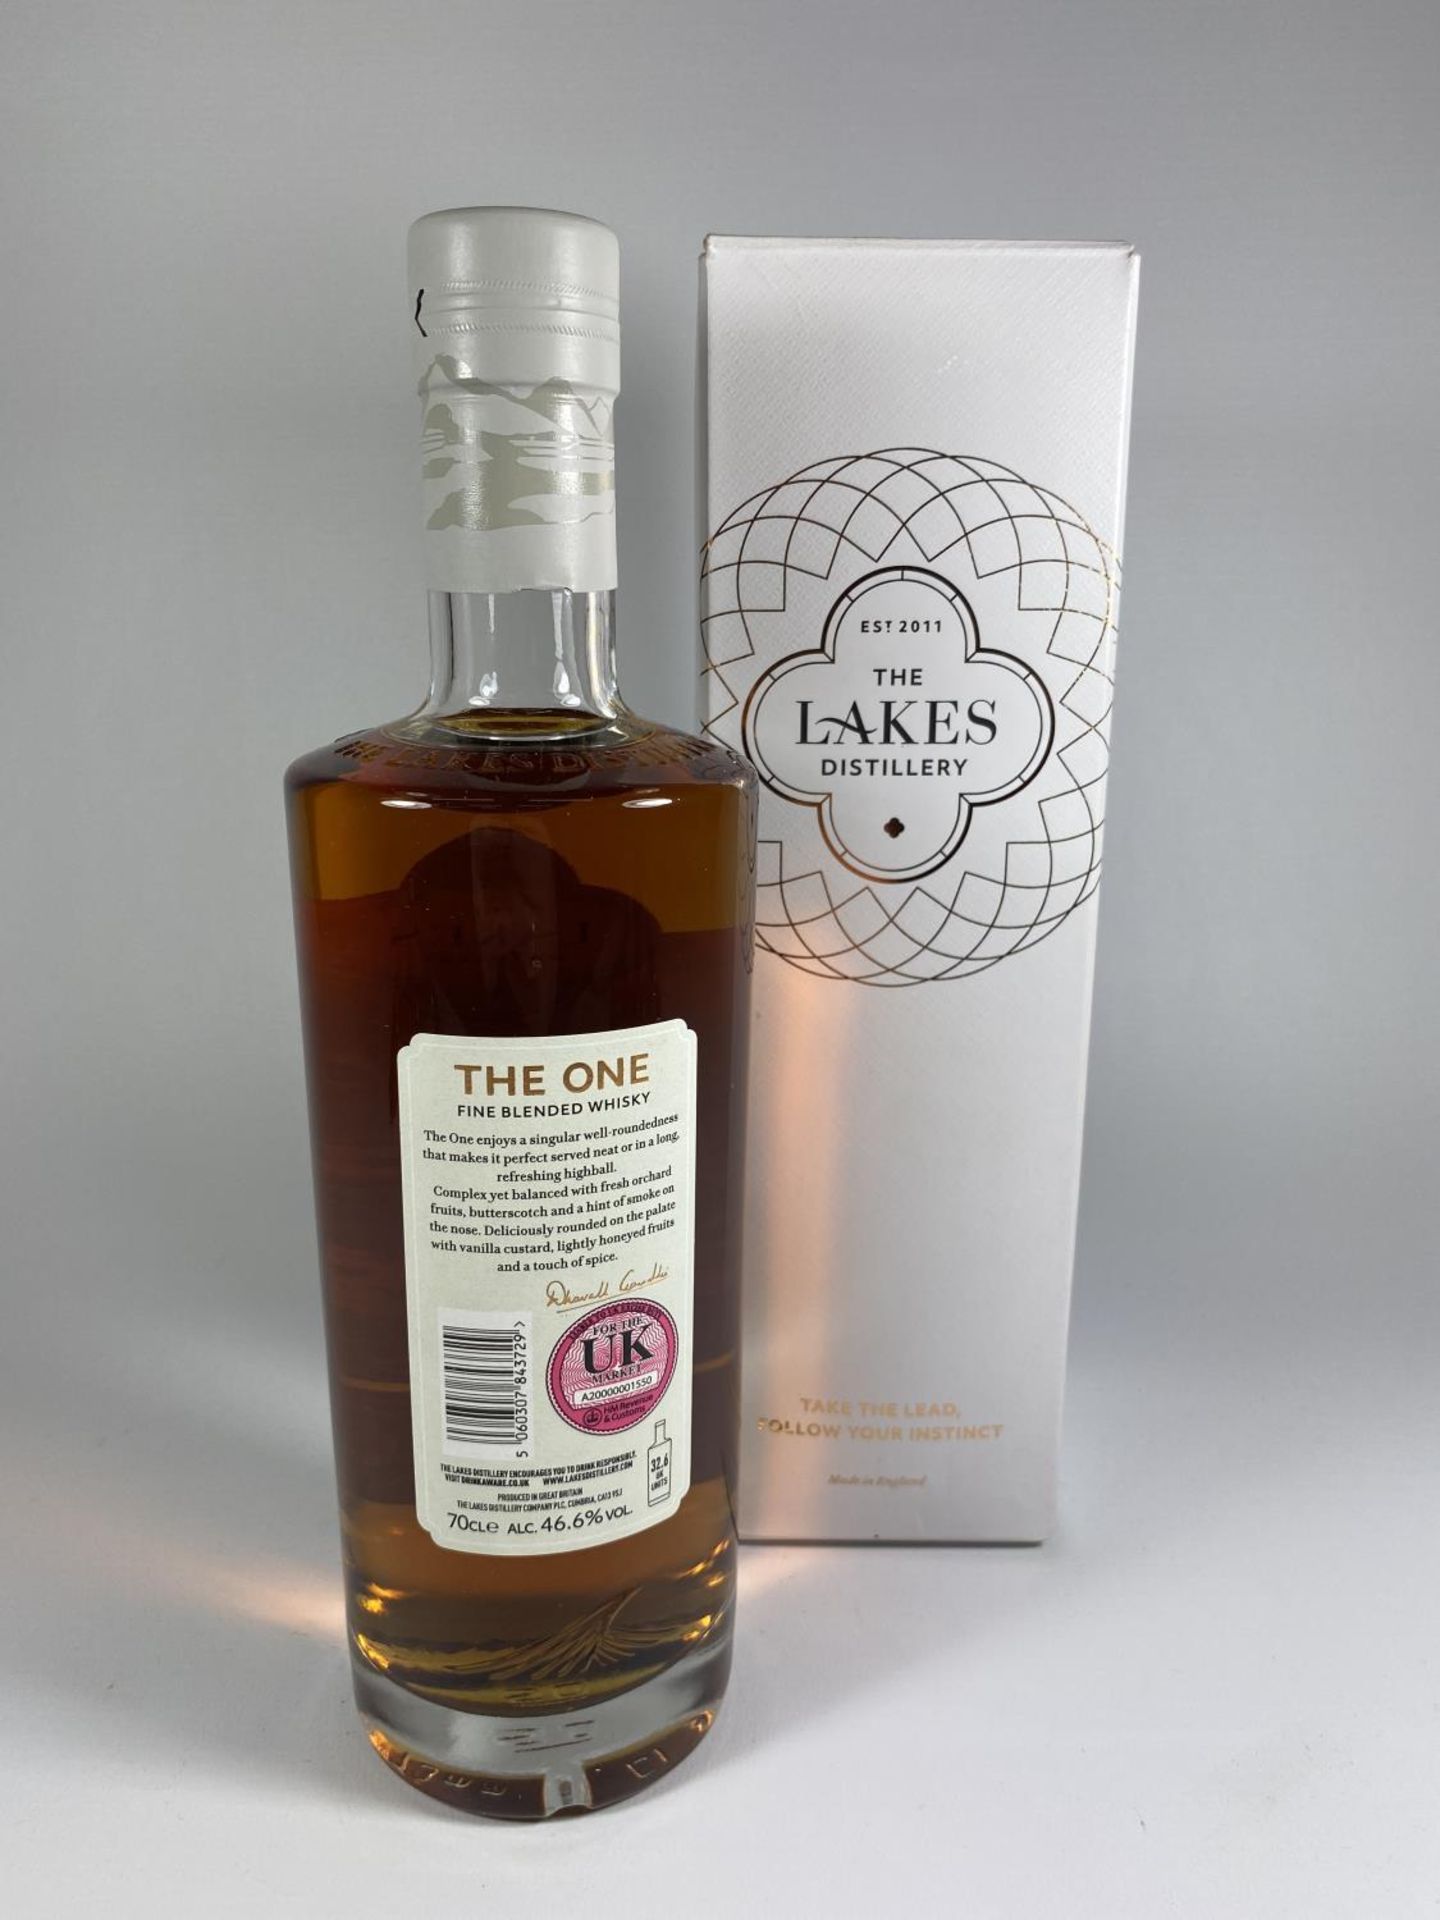 1 X 70CL BOXED BOTTLE - THE LAKES DISTILLERY 'THE ONE' FINE BLENDED WHISKY - Bild 3 aus 3